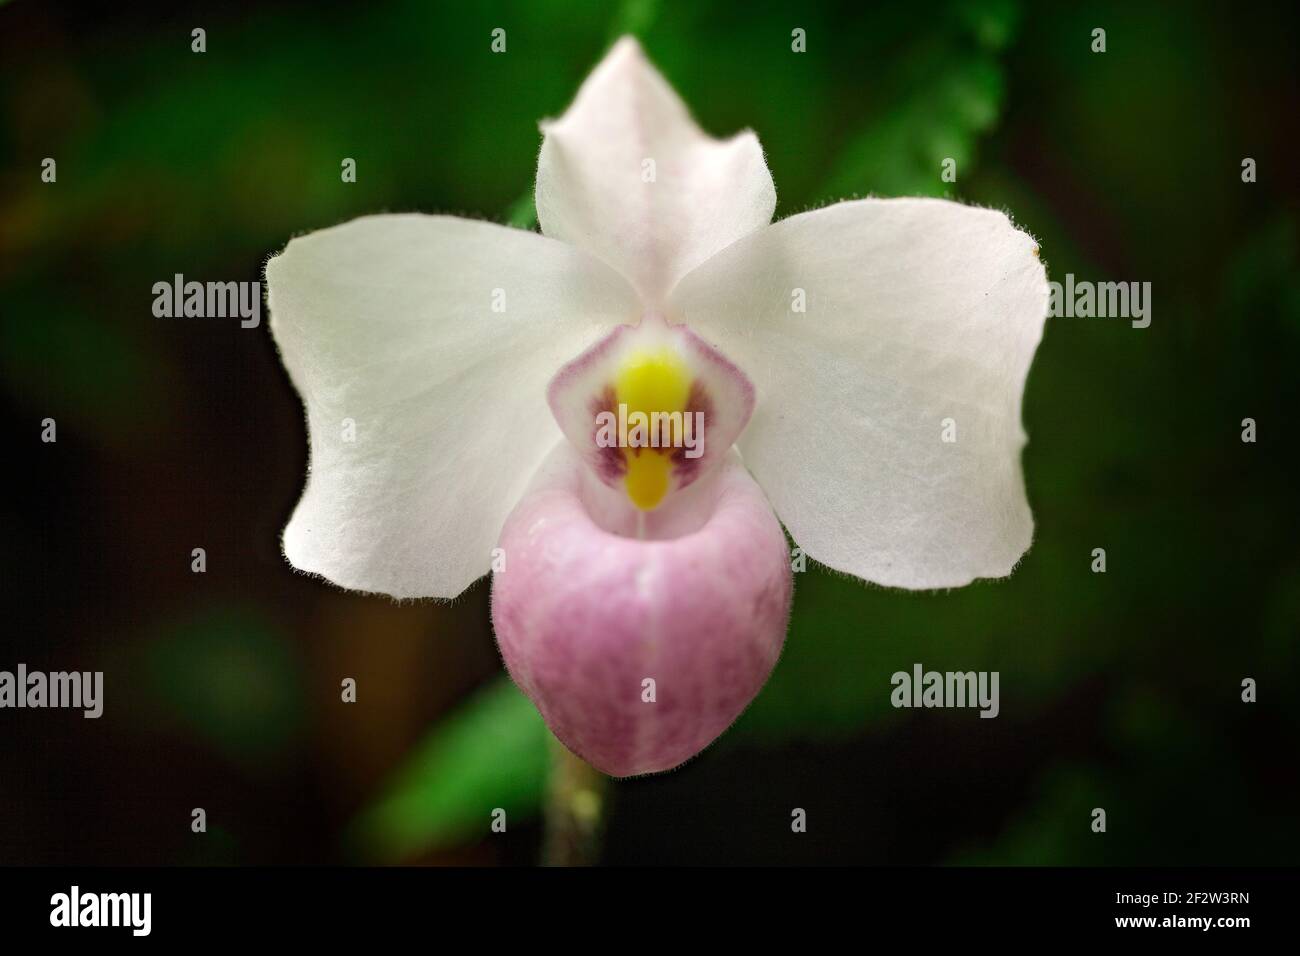 Paphiopedilum delenatii, Vietnam wild orchid, pink flower, nature habitat. Beautiful orchid bloom, close-up detail. Wild flower from South America. Ar Stock Photo